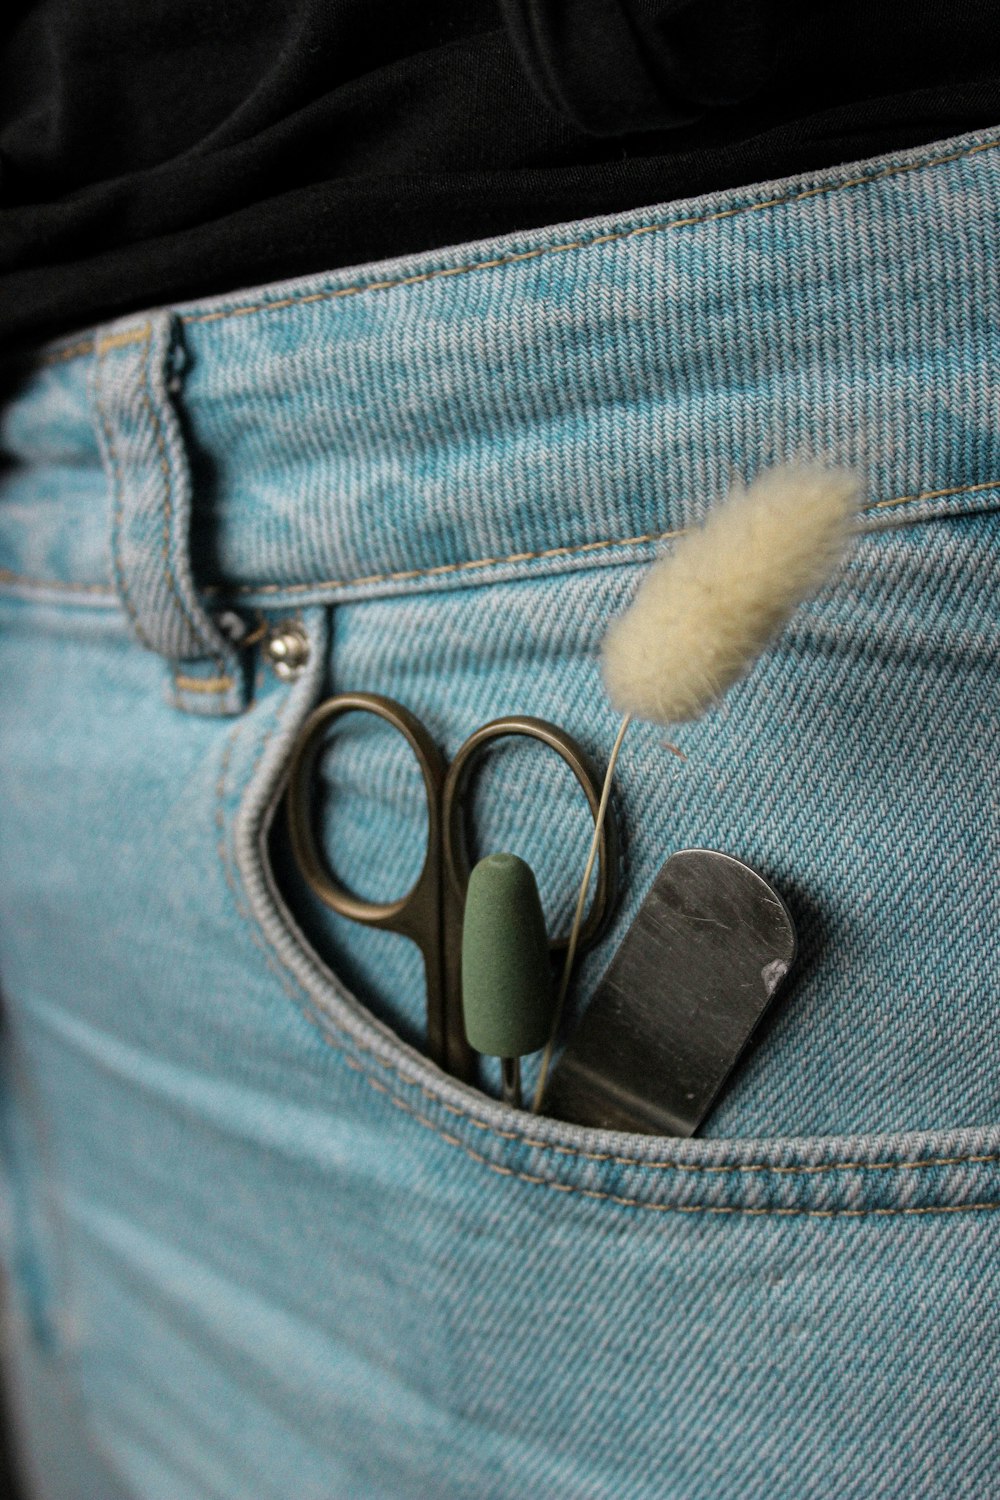 a pair of scissors sticking out of a pocket